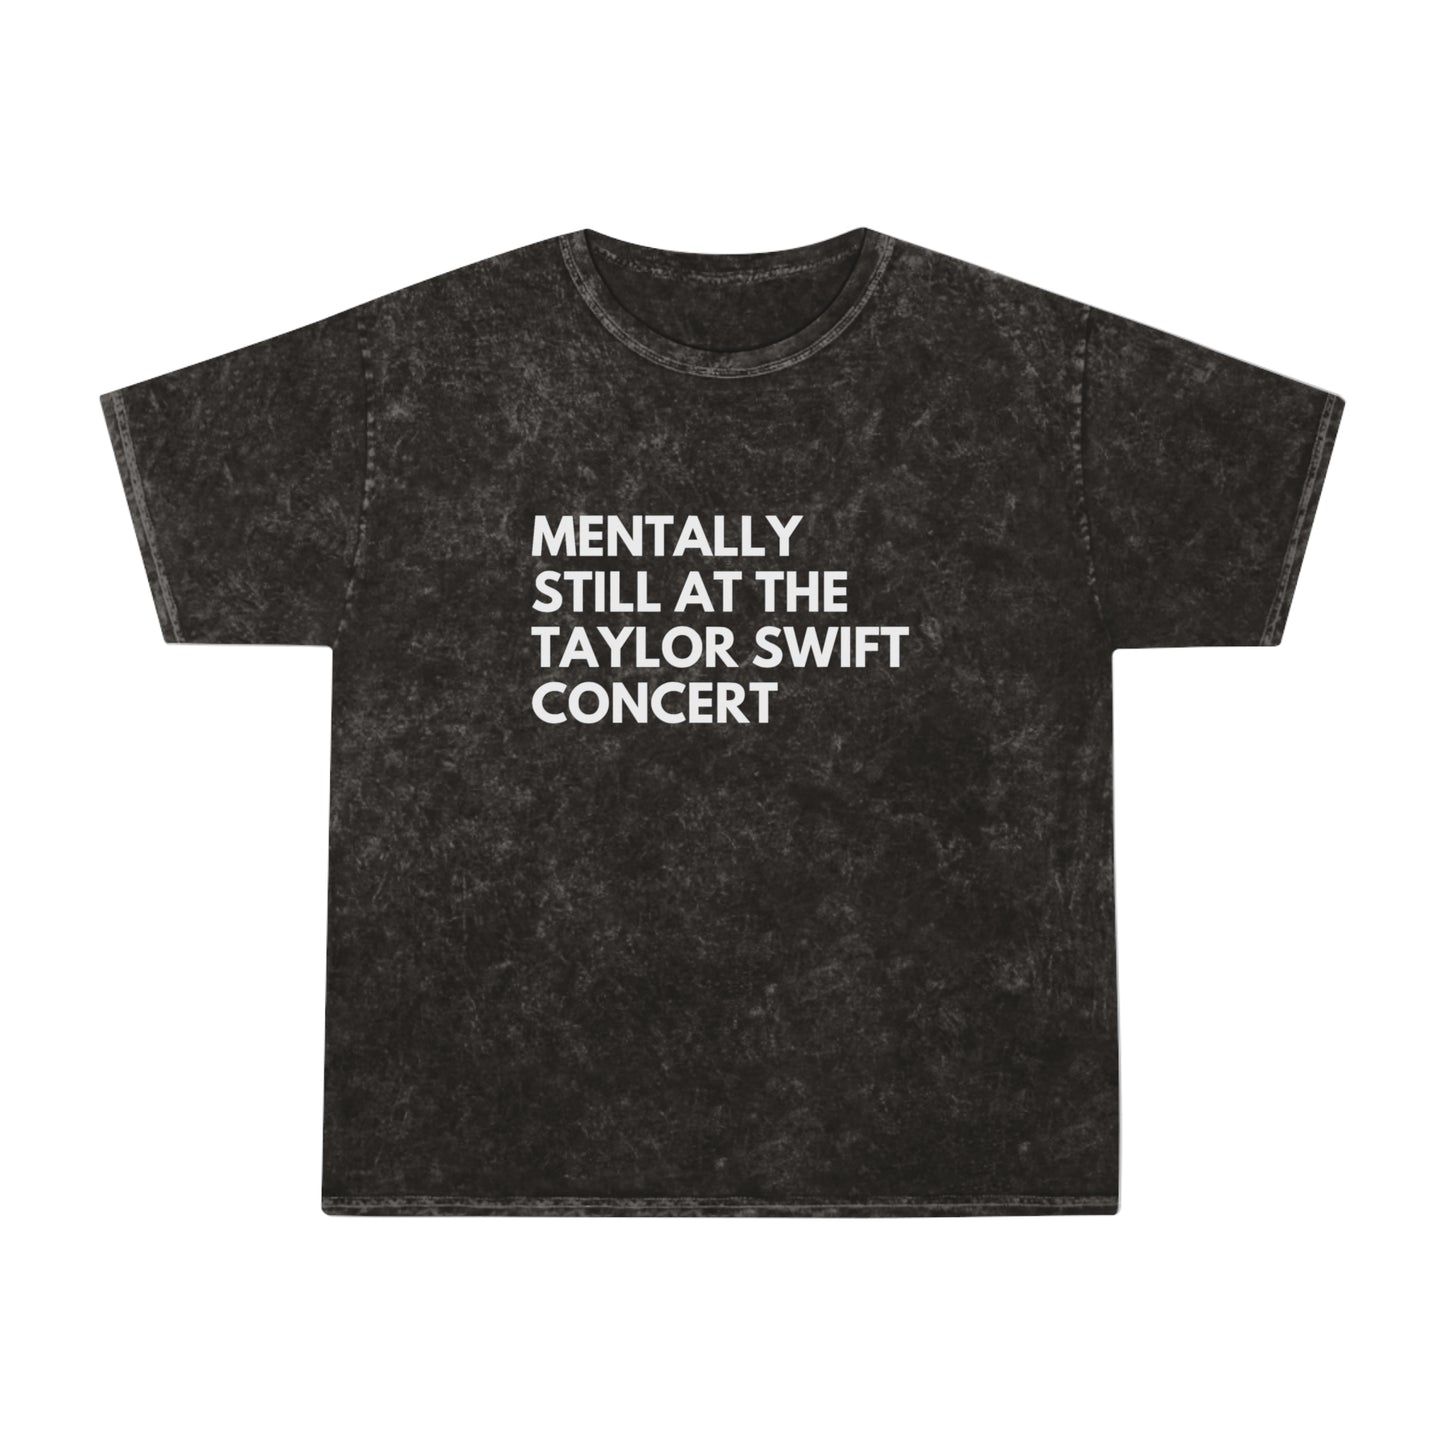 Mentally Still At The Taylor Swift Concert Unisex Mineral Wash Vintage Tee Shirt